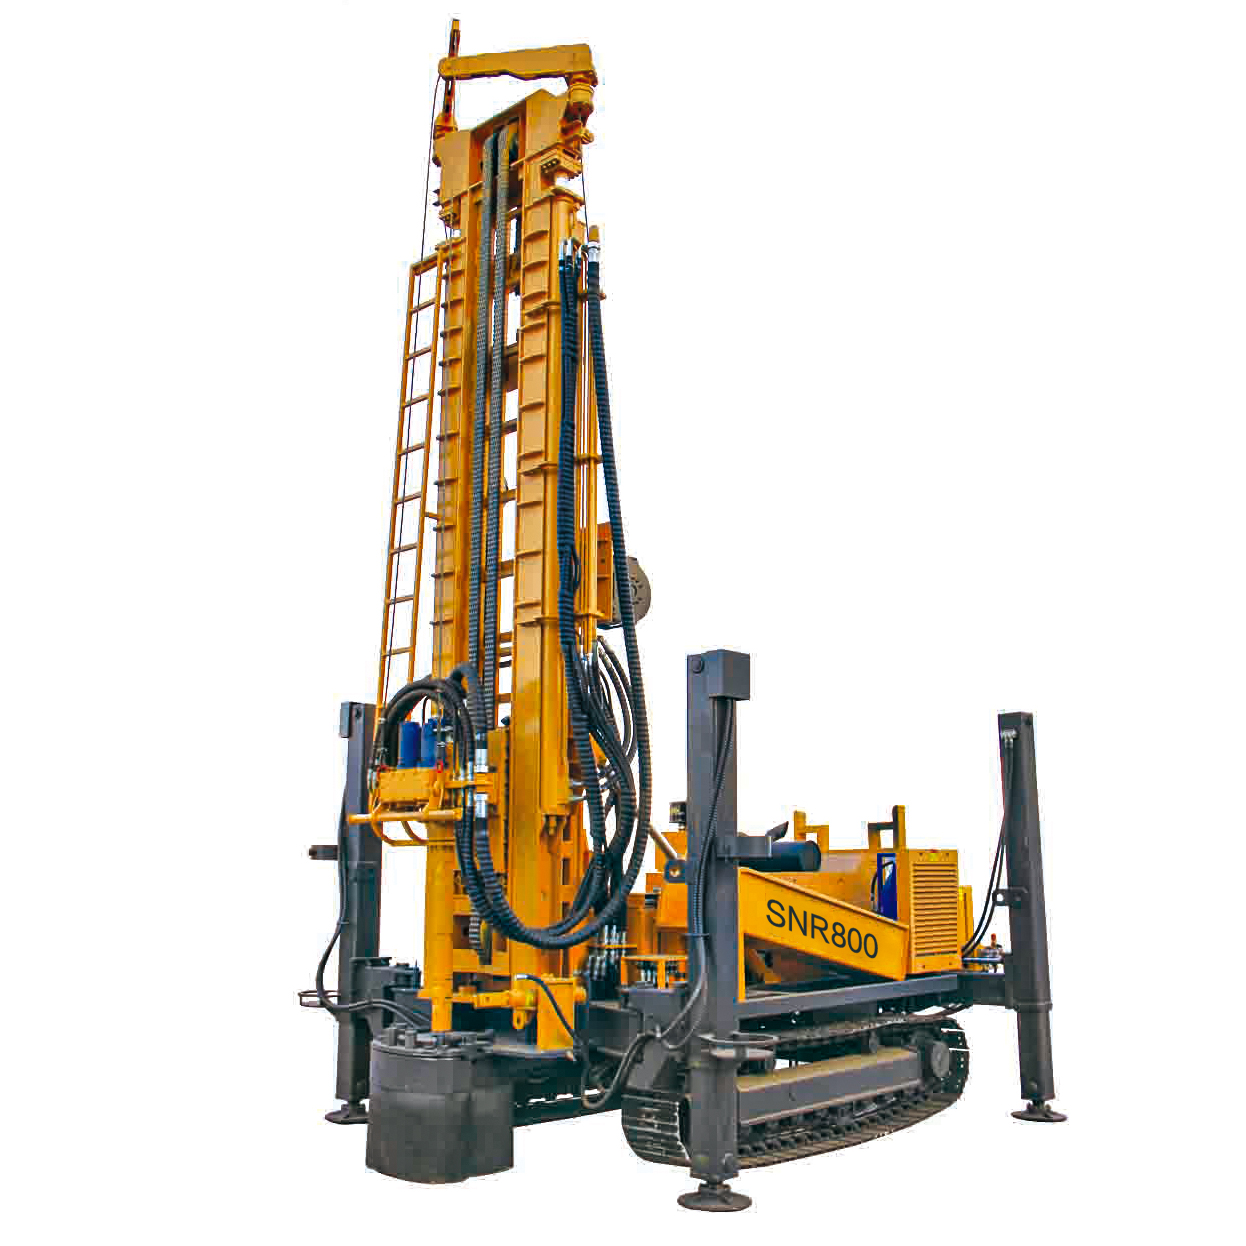 SNR800 Water Well Drilling Rig